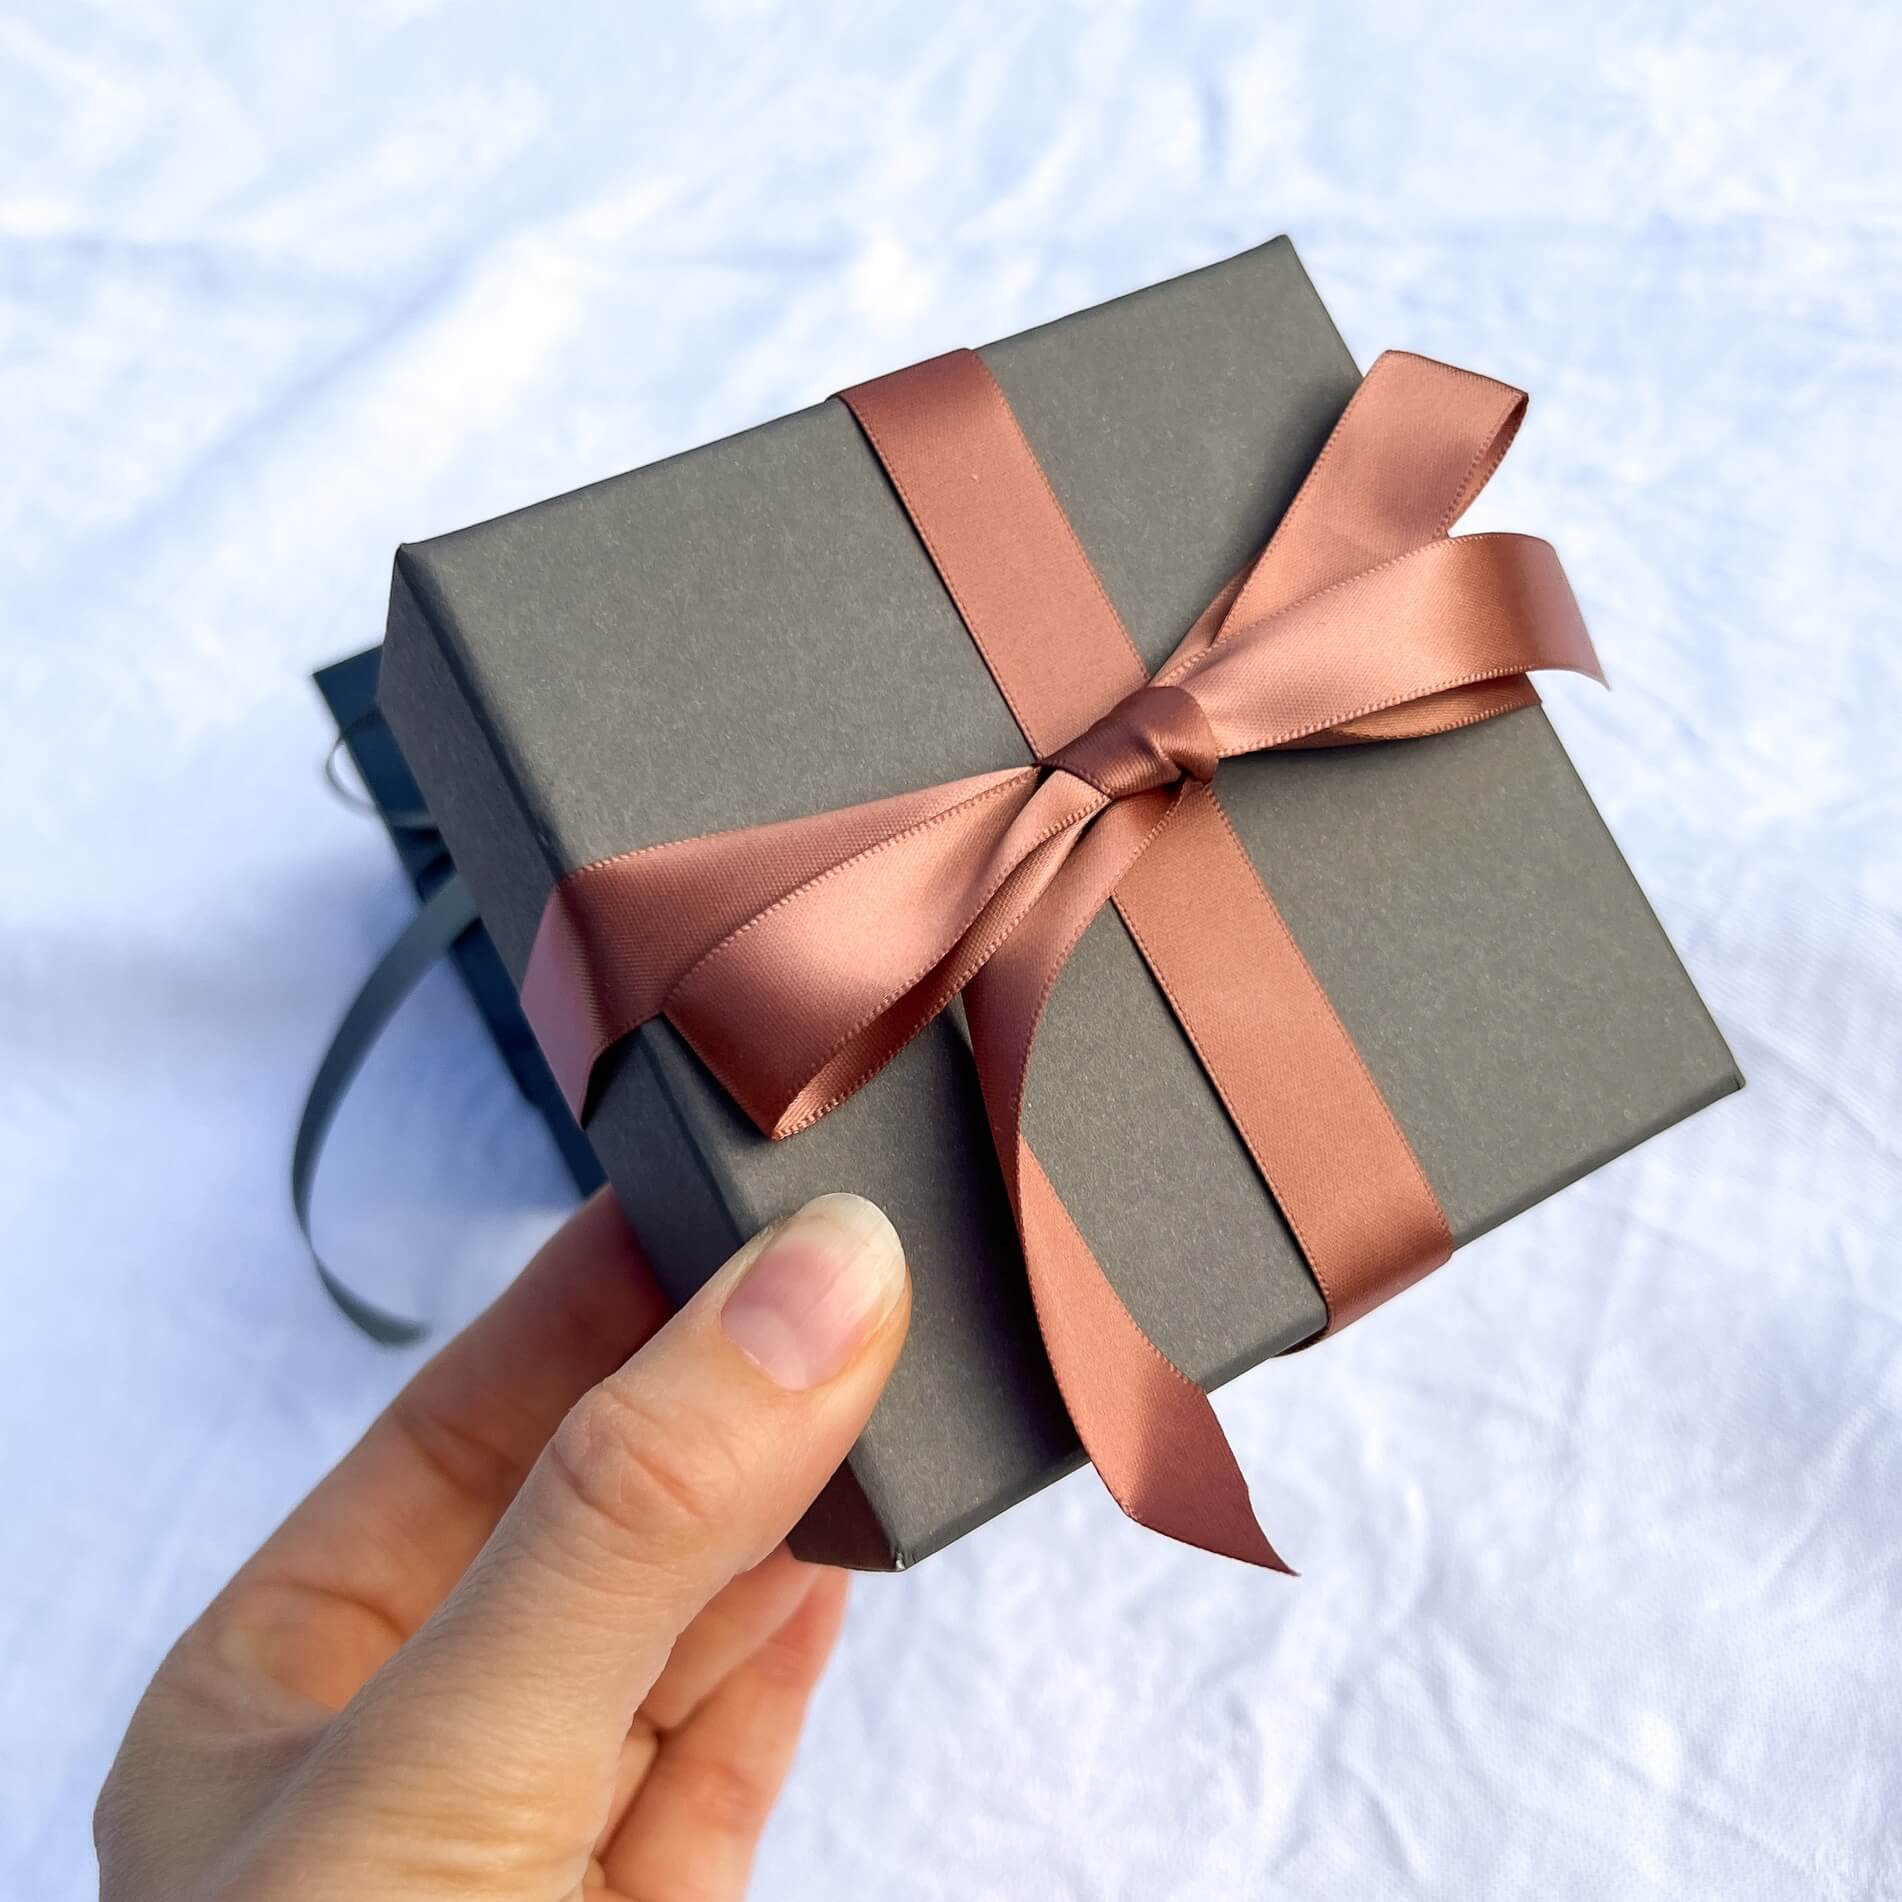 Luxury grey gift box tied in a rose gold pink ribbon held to camera